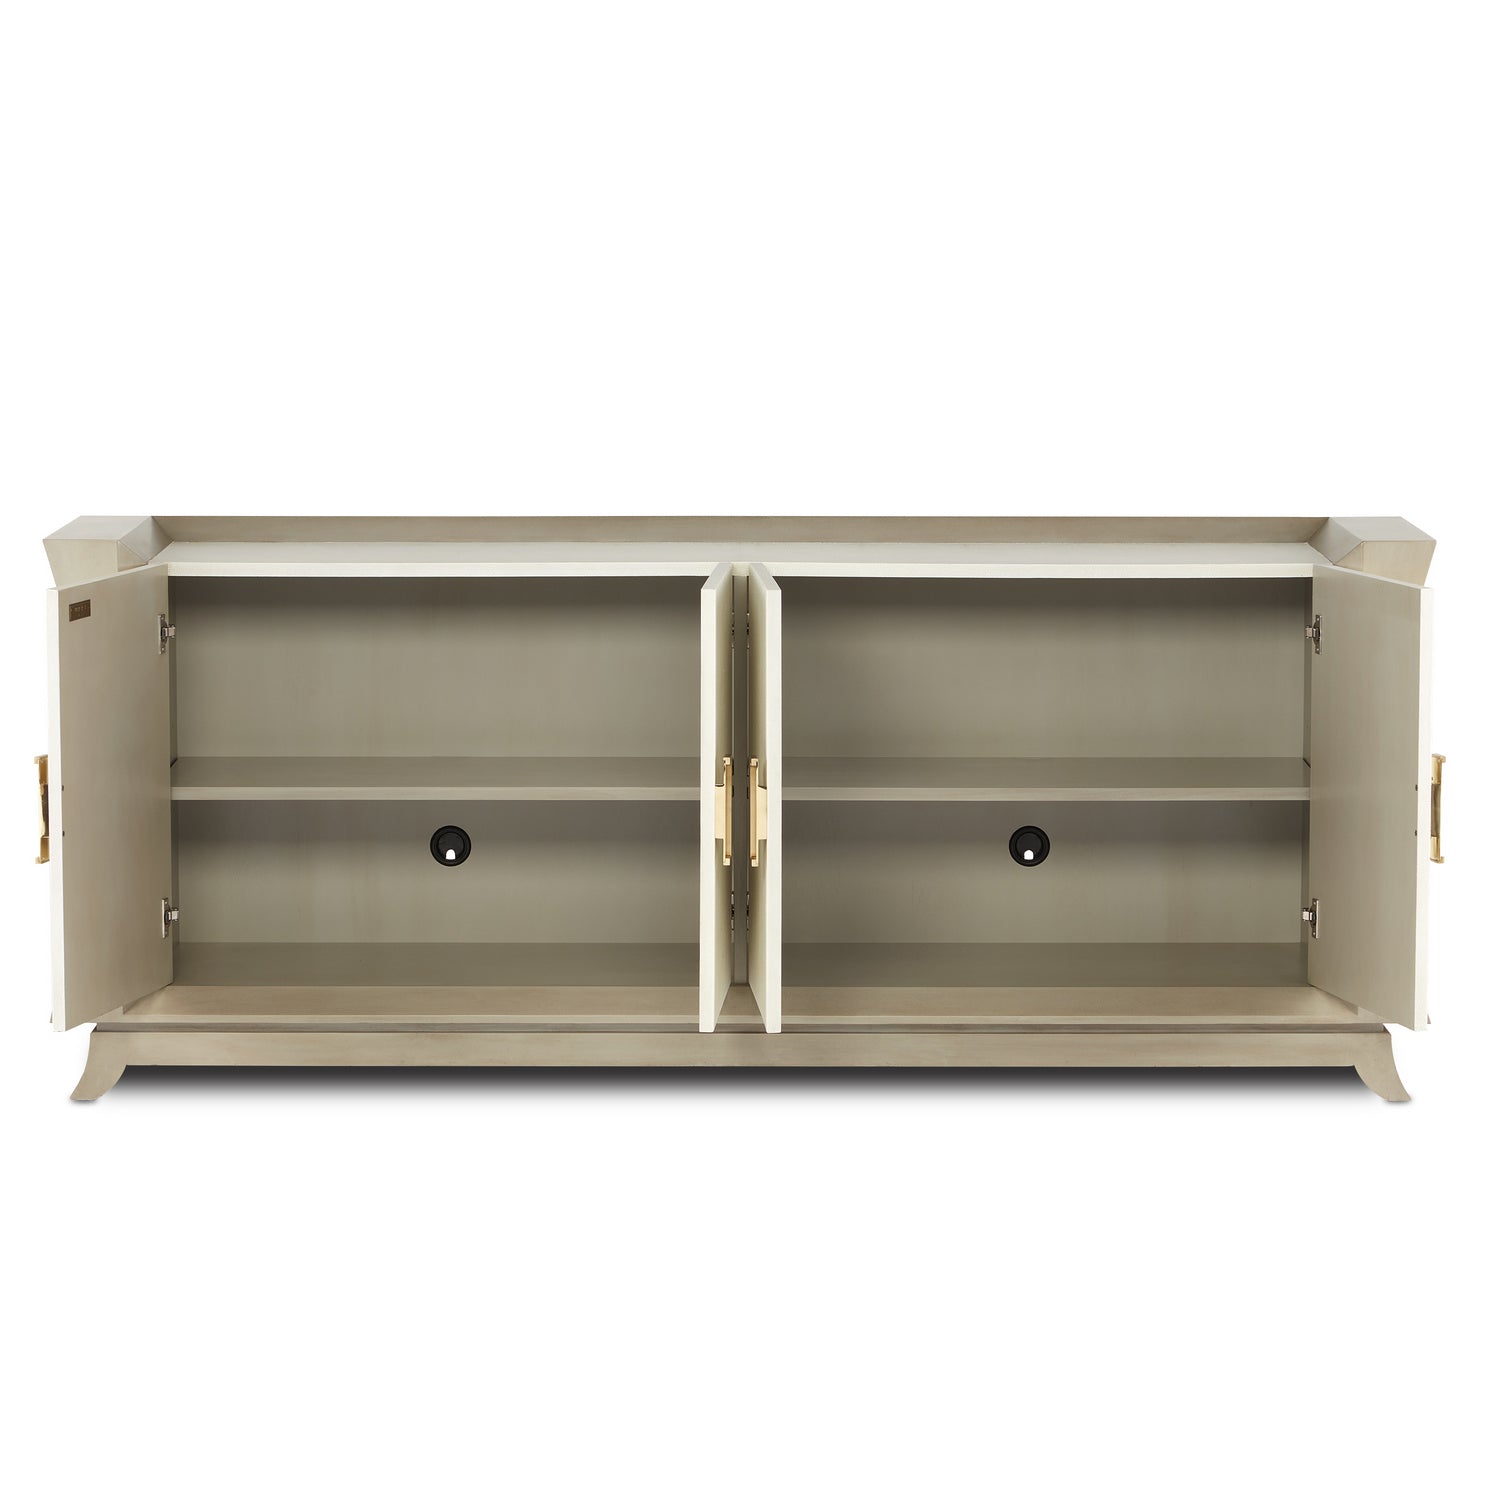 Credenza from the Barry Goralnick collection in Oyster Gray/Cream/Brushed Polished Brass finish